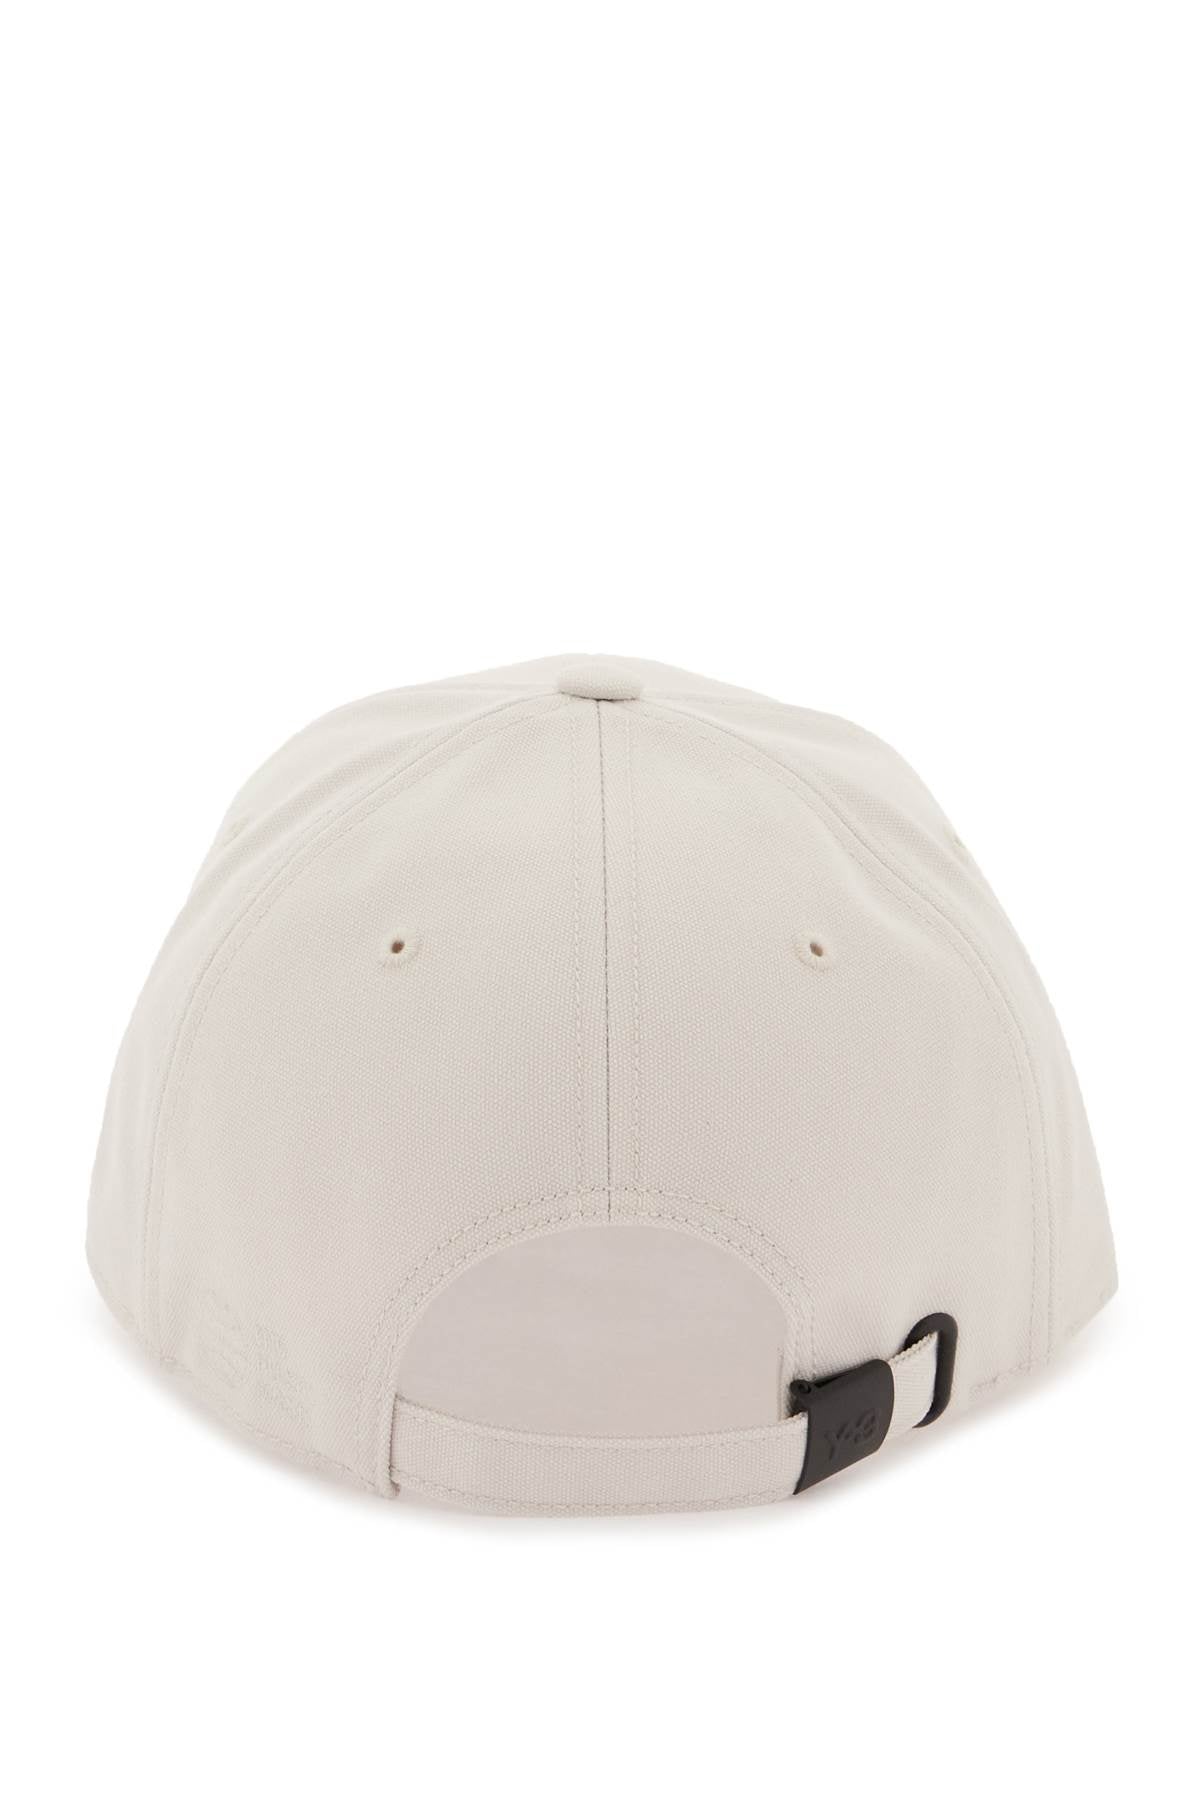 Y-3 baseball cap with embroidered logo-2